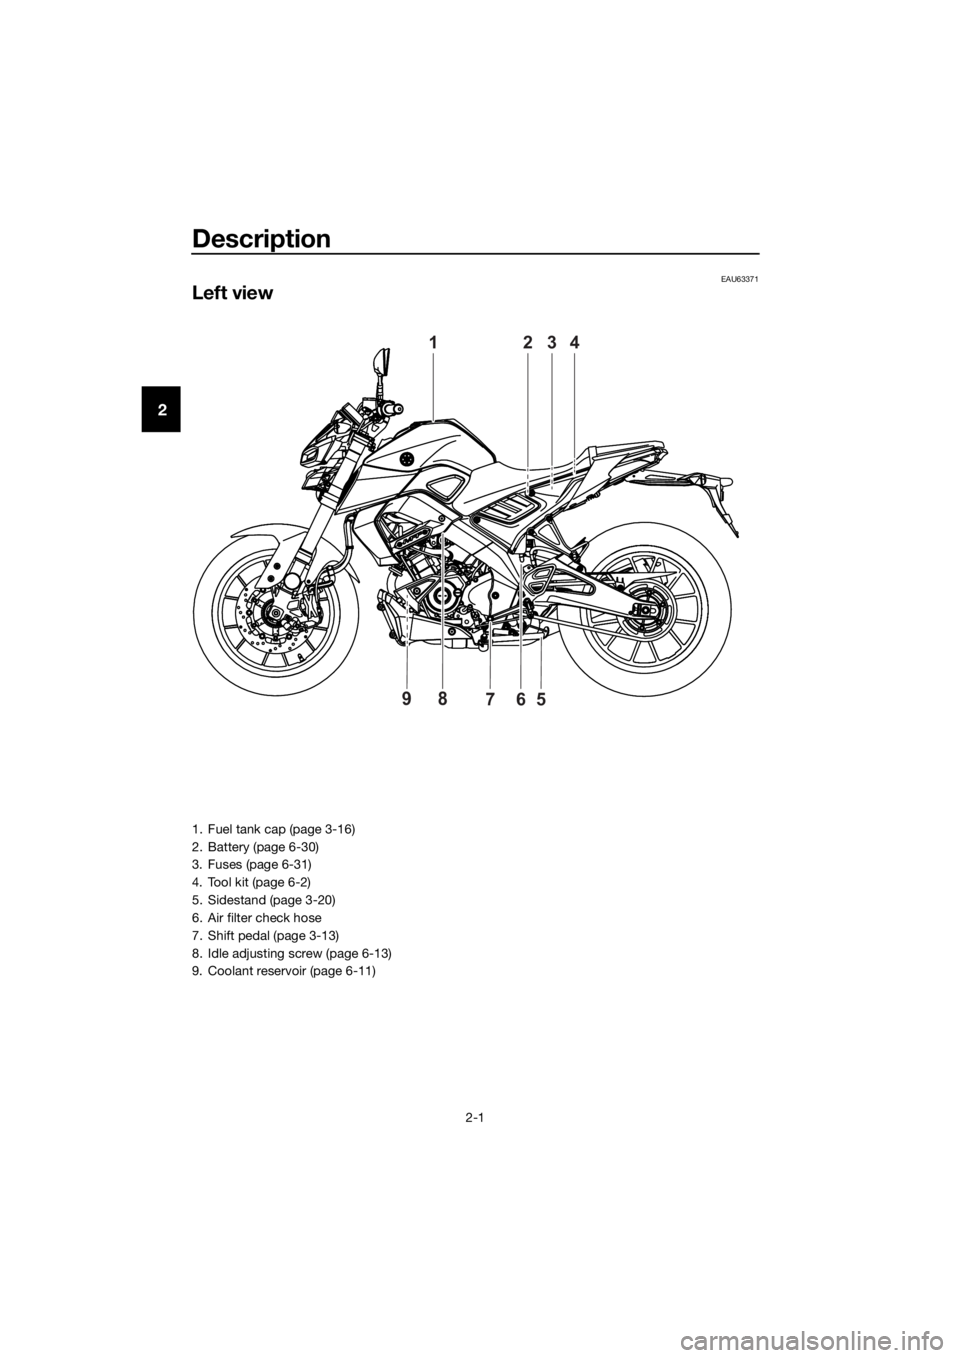 YAMAHA MT-125 2020  Owners Manual Description
2-1
2
EAU63371
Left view
1234
65798
1. Fuel tank cap (page 3-16)
2. Battery (page 6-30)
3. Fuses (page 6-31)
4. Tool kit (page 6-2)
5. Sidestand (page 3-20)
6. Air filter check hose
7. Shi